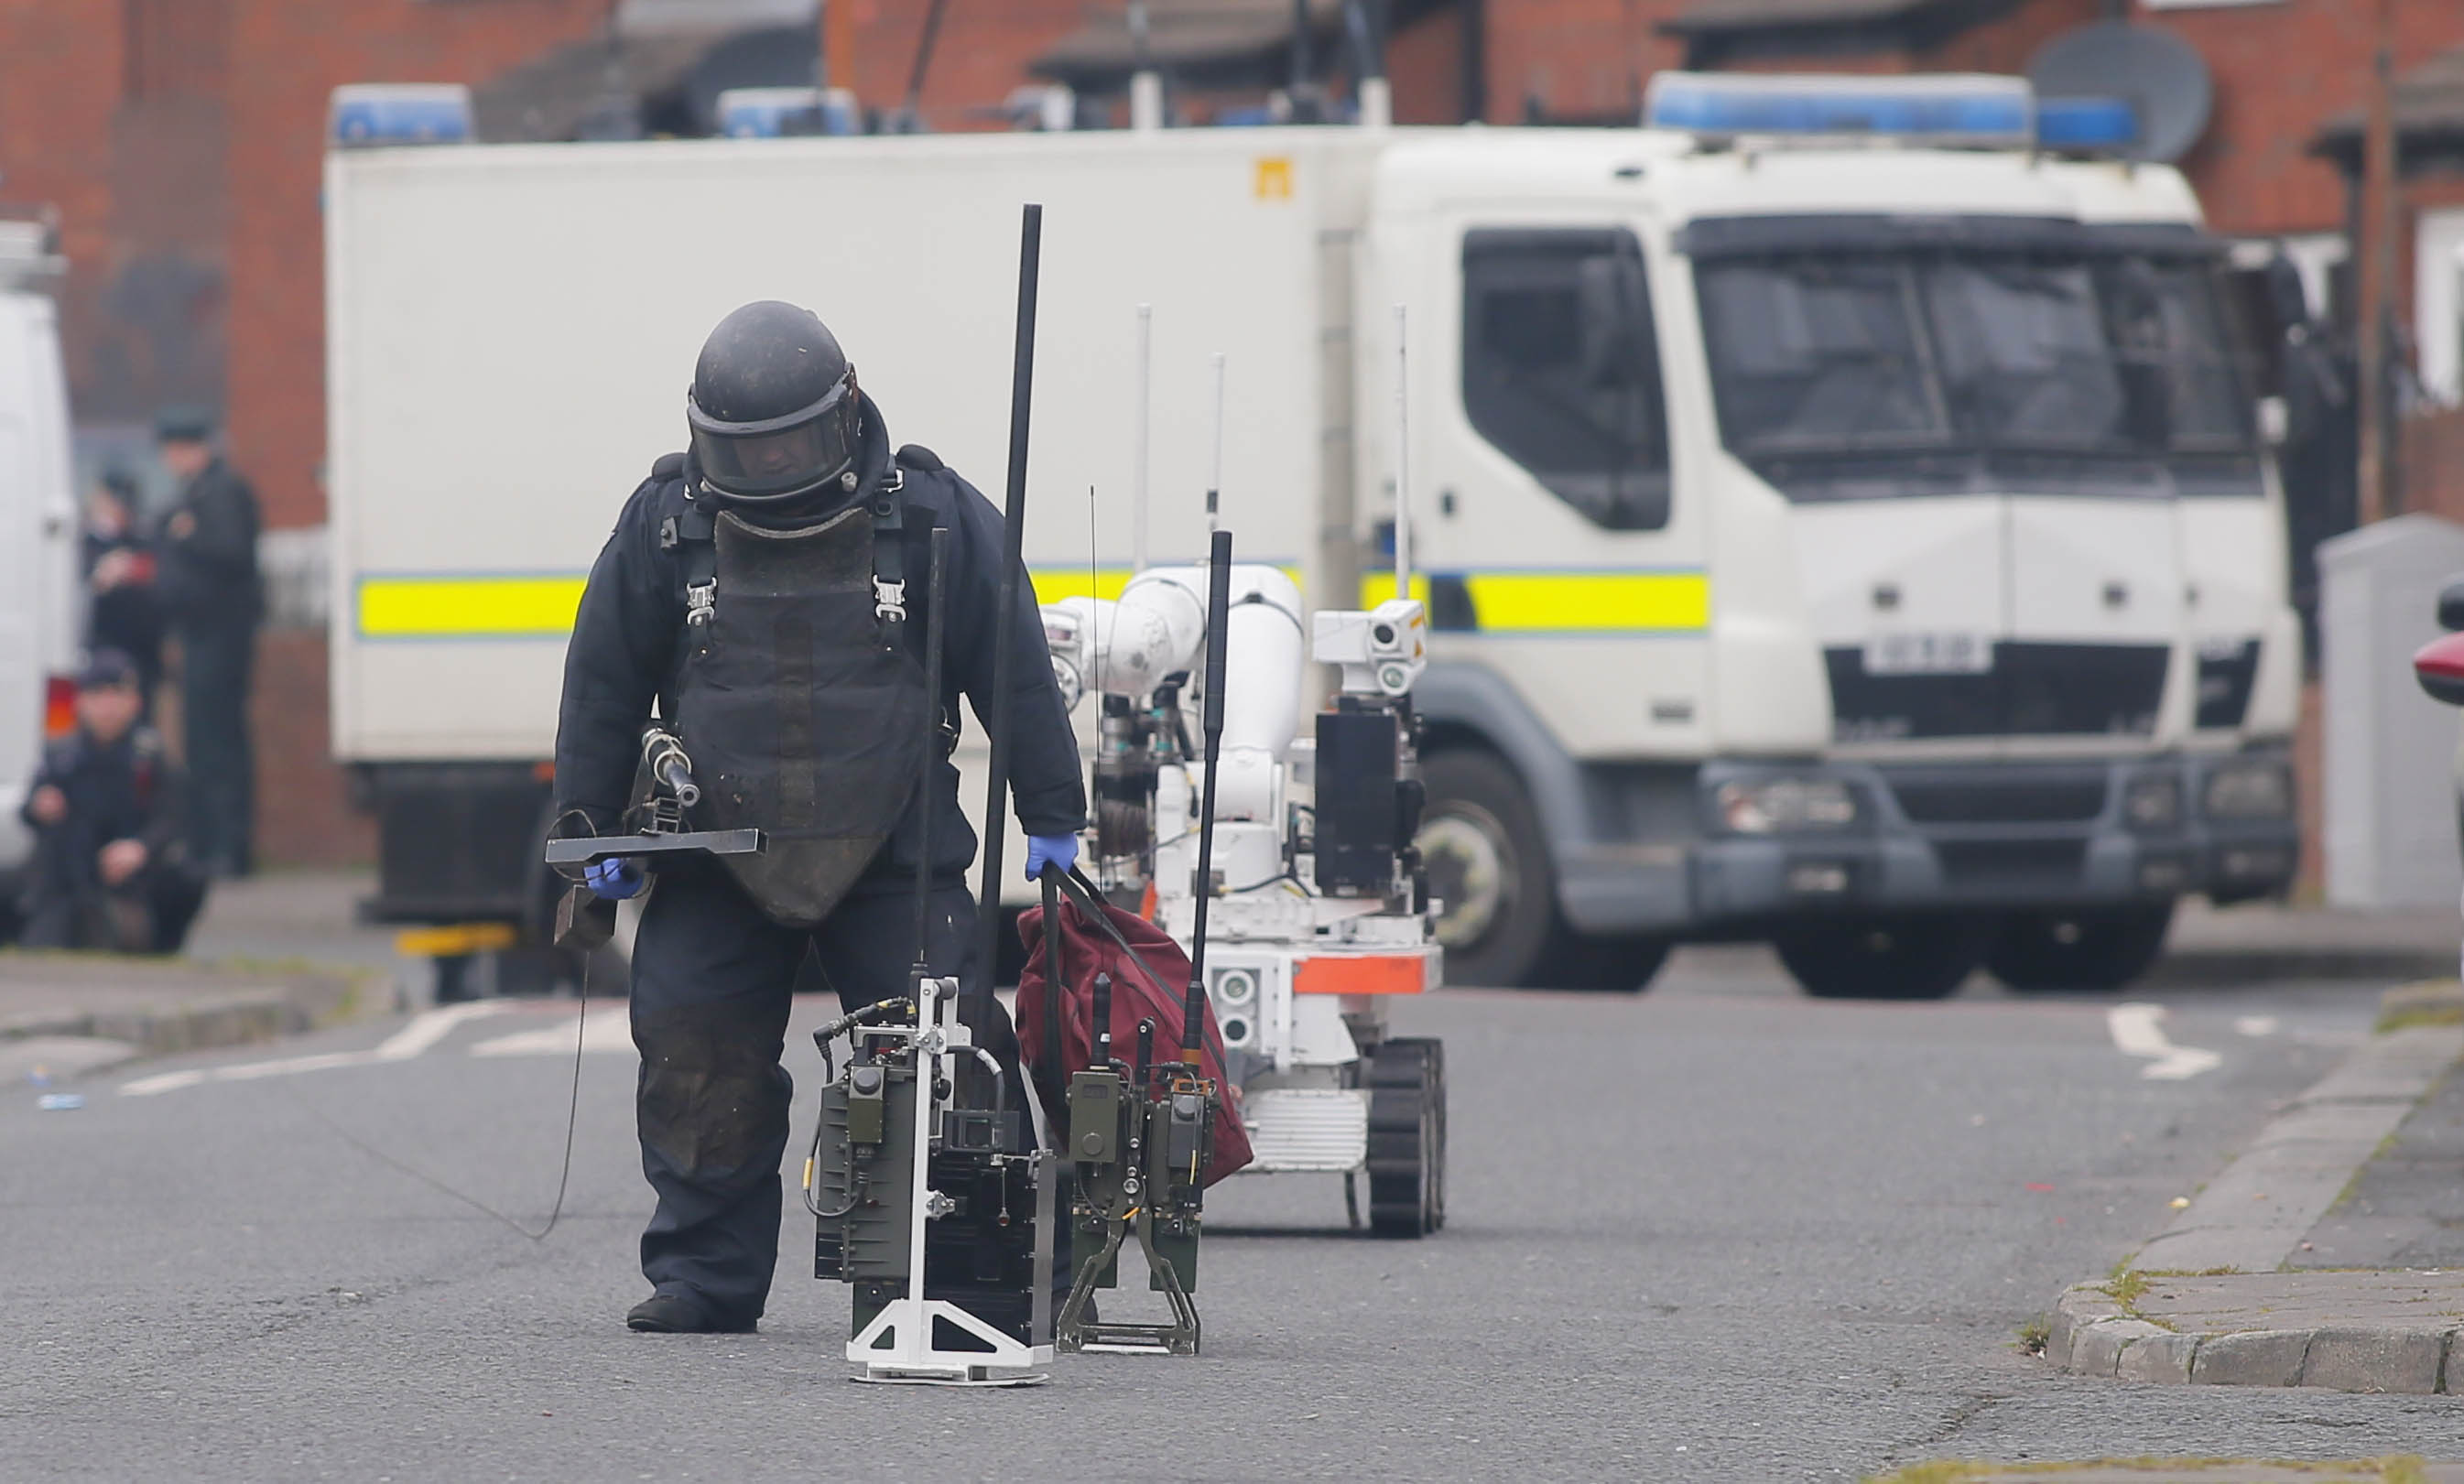 A British army technical officer at the scene of Friday’s pipe bomb explosion